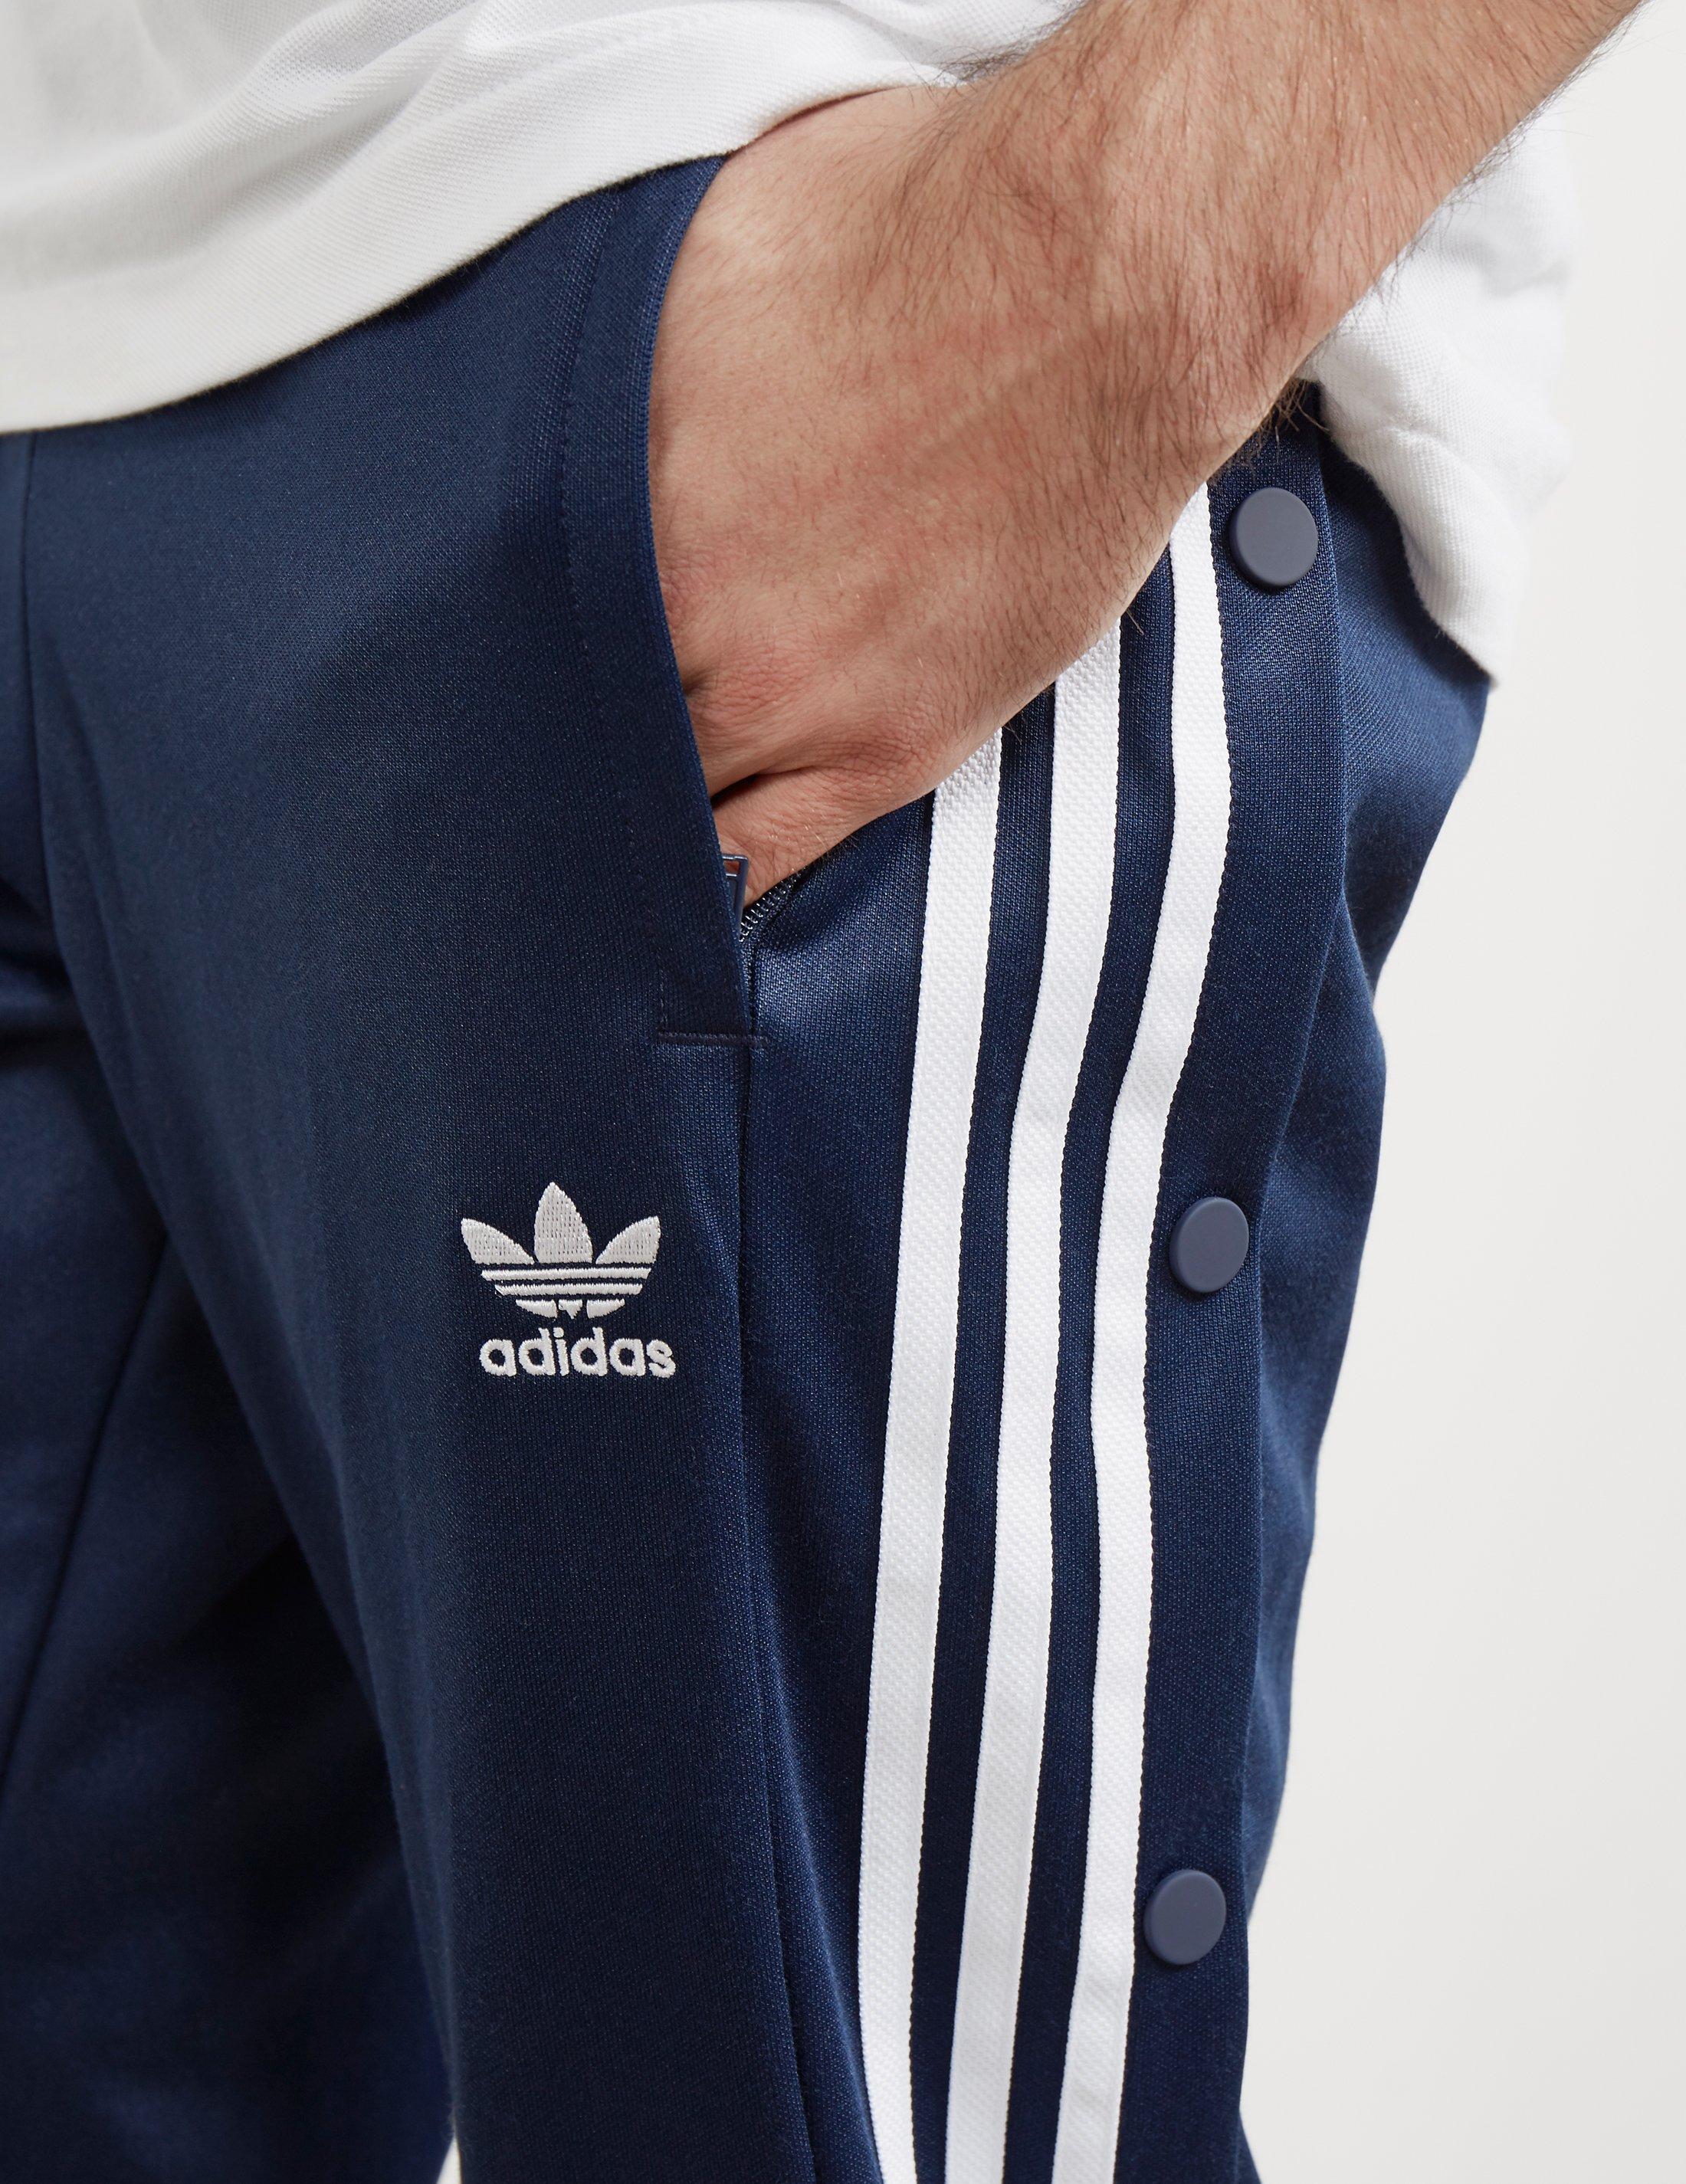 Buy > adidas blue track pants > in stock